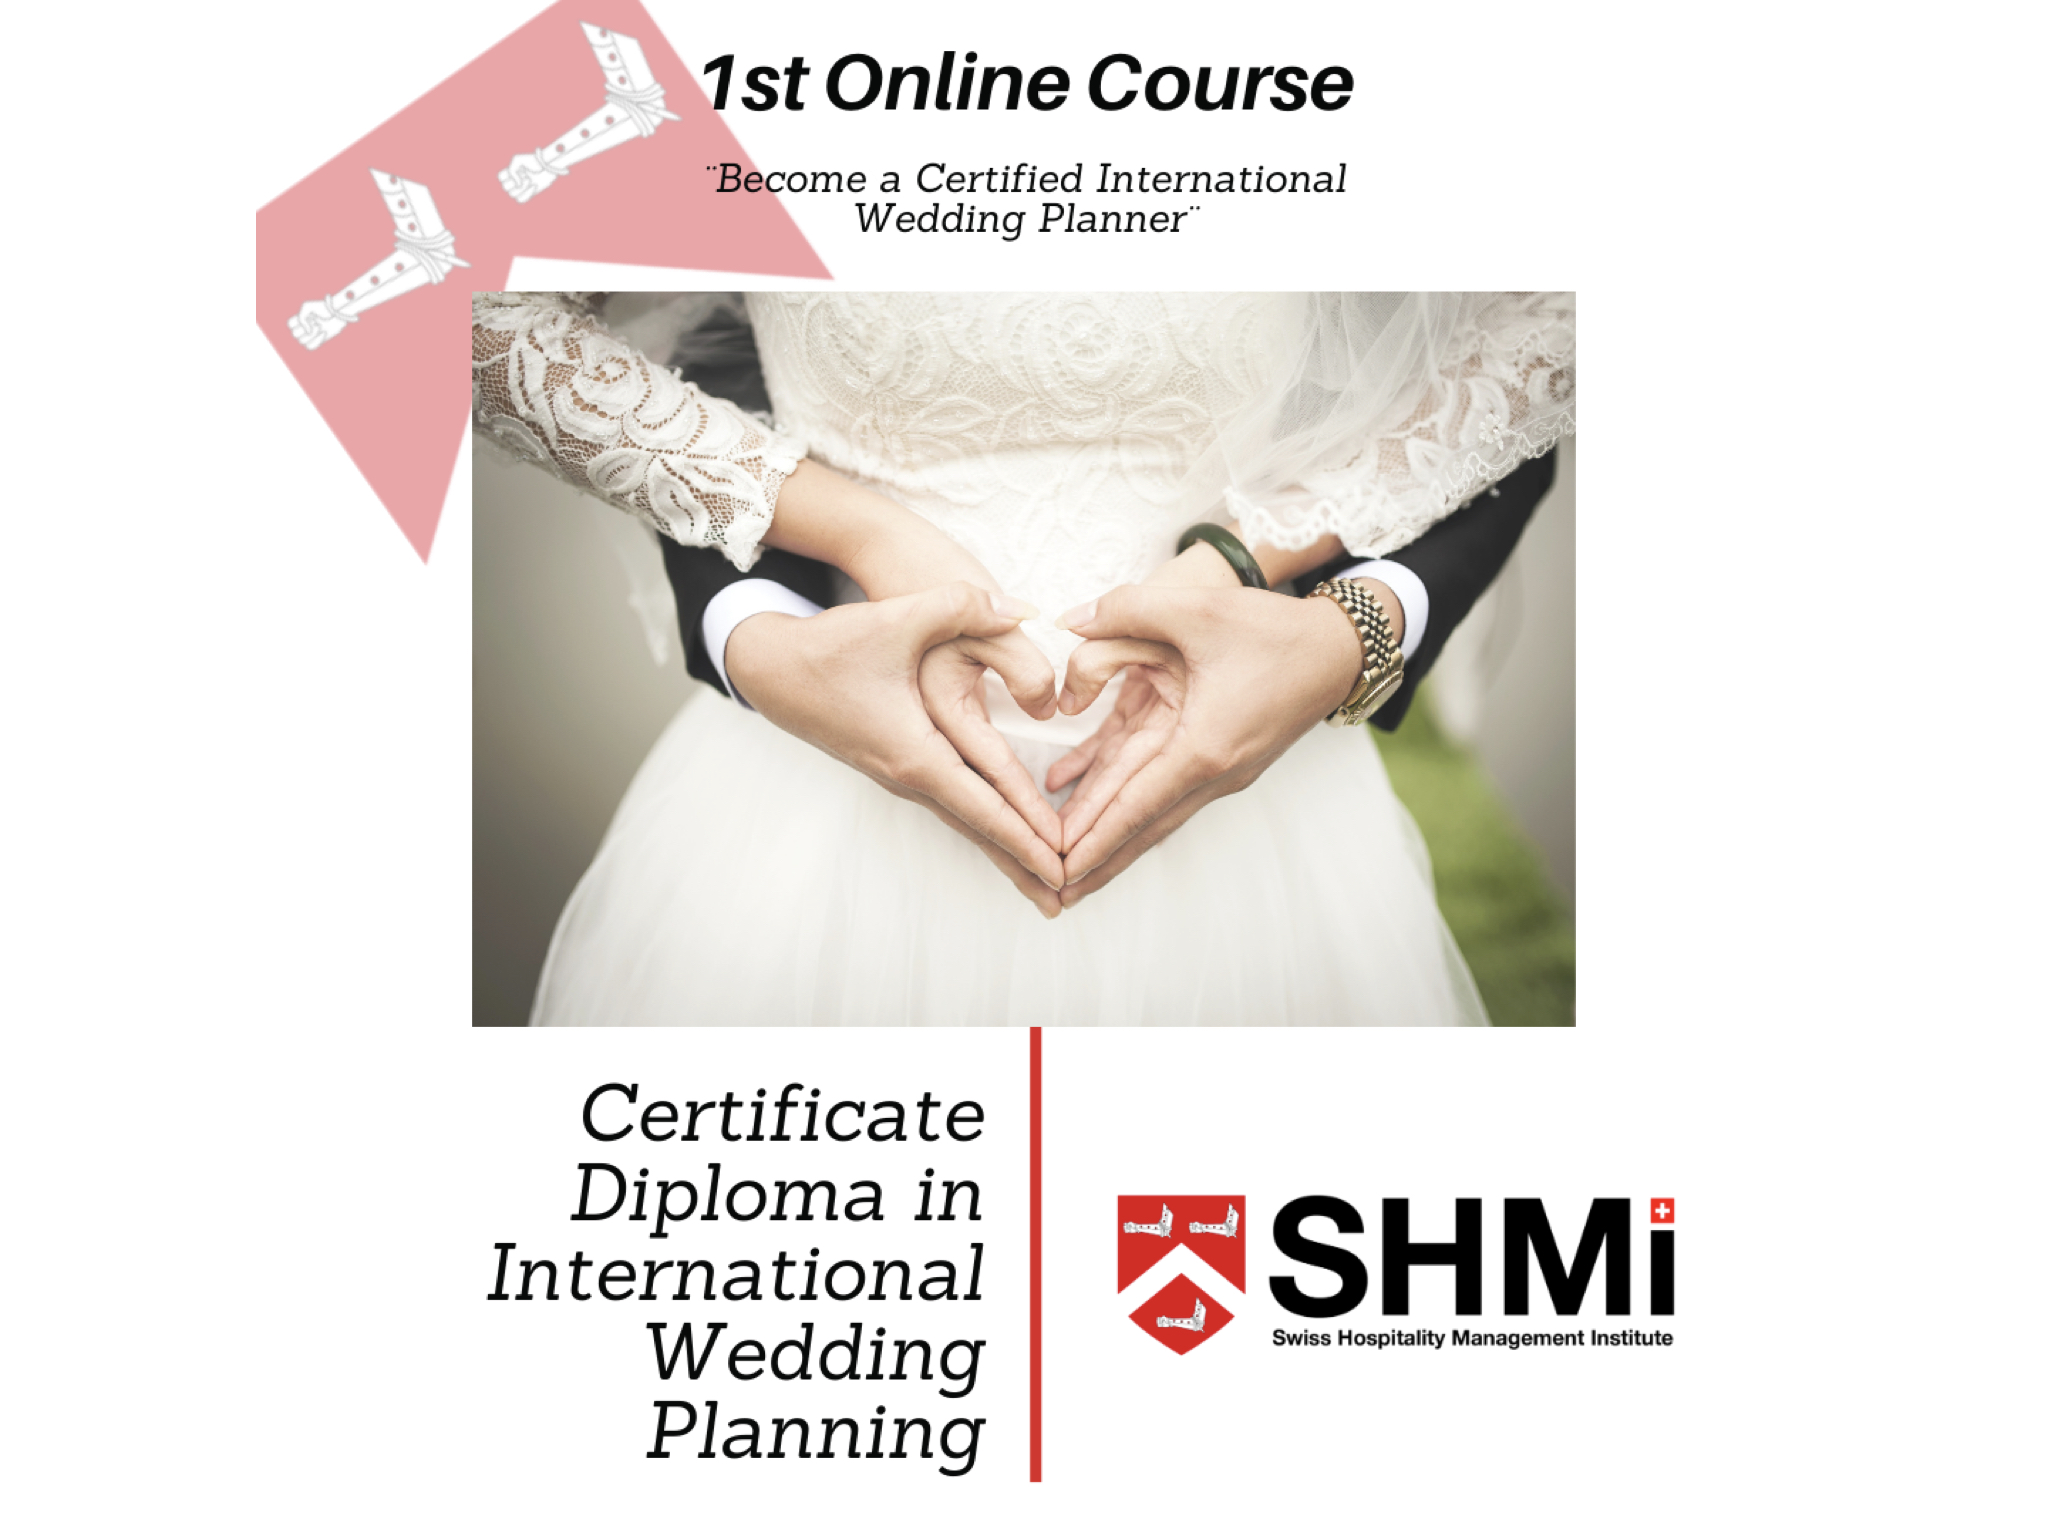 SHMi, a sister brand of HTMi Switzerland, announces its first online course: Certificate Diploma in International Wedding Planning